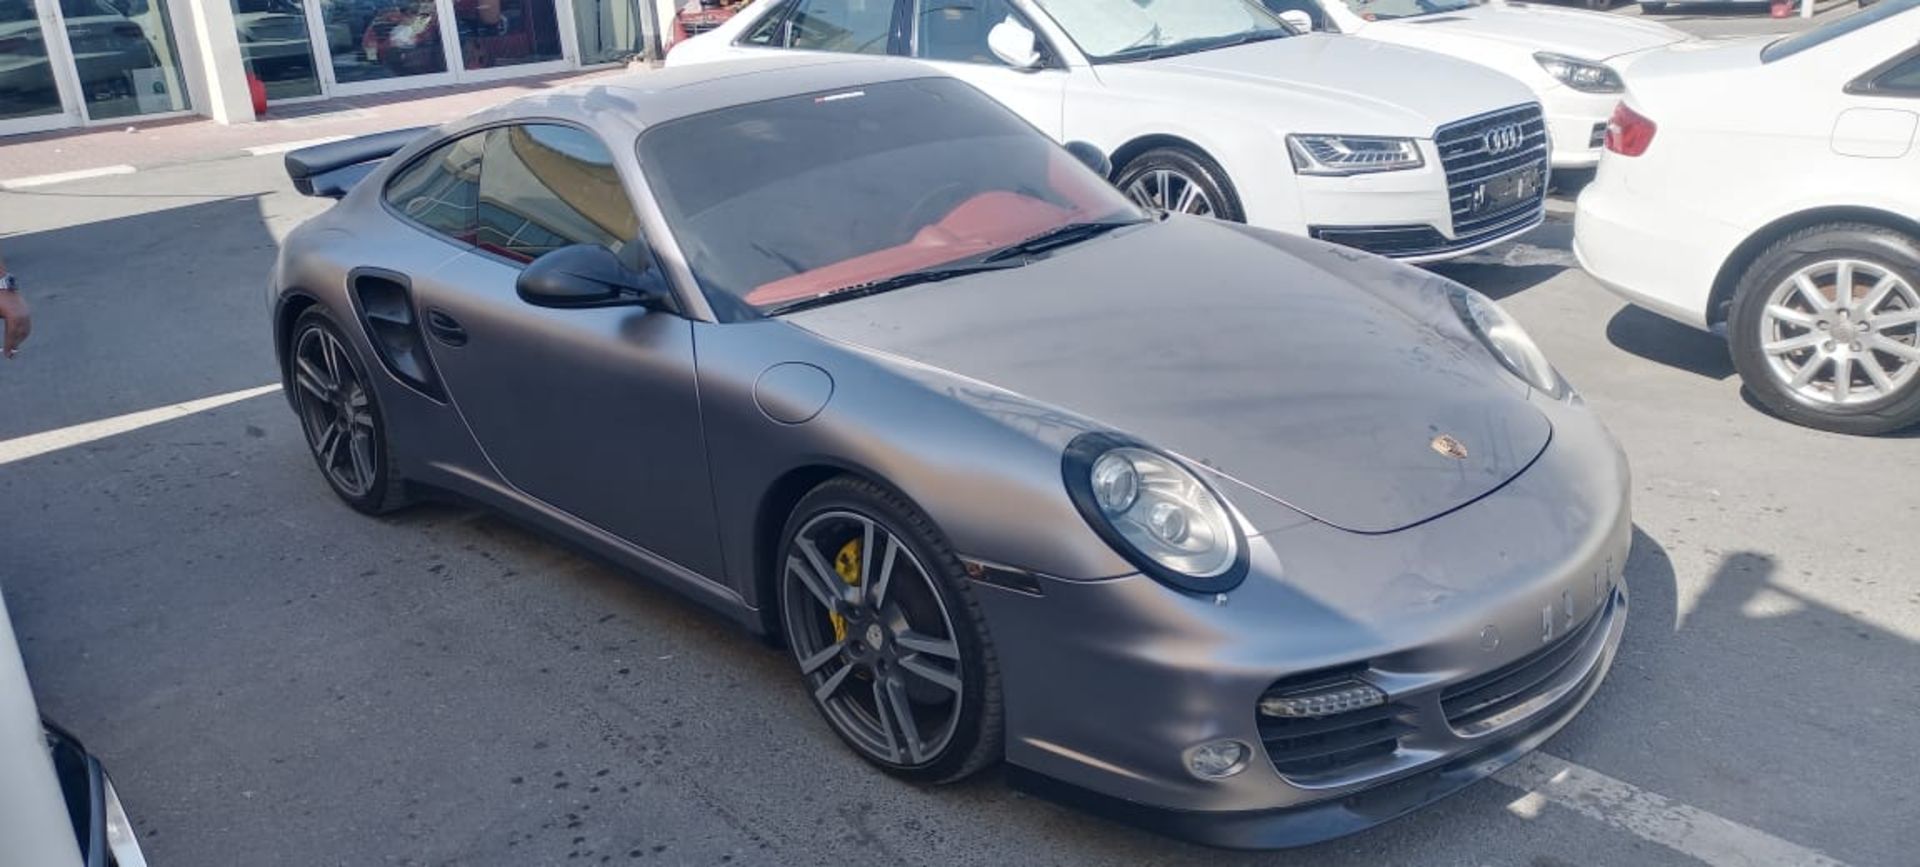 2010 PORSCHE 911 TURBO PDK 65,000 KM - CAN SELL VAT FREE FOR EXPORT